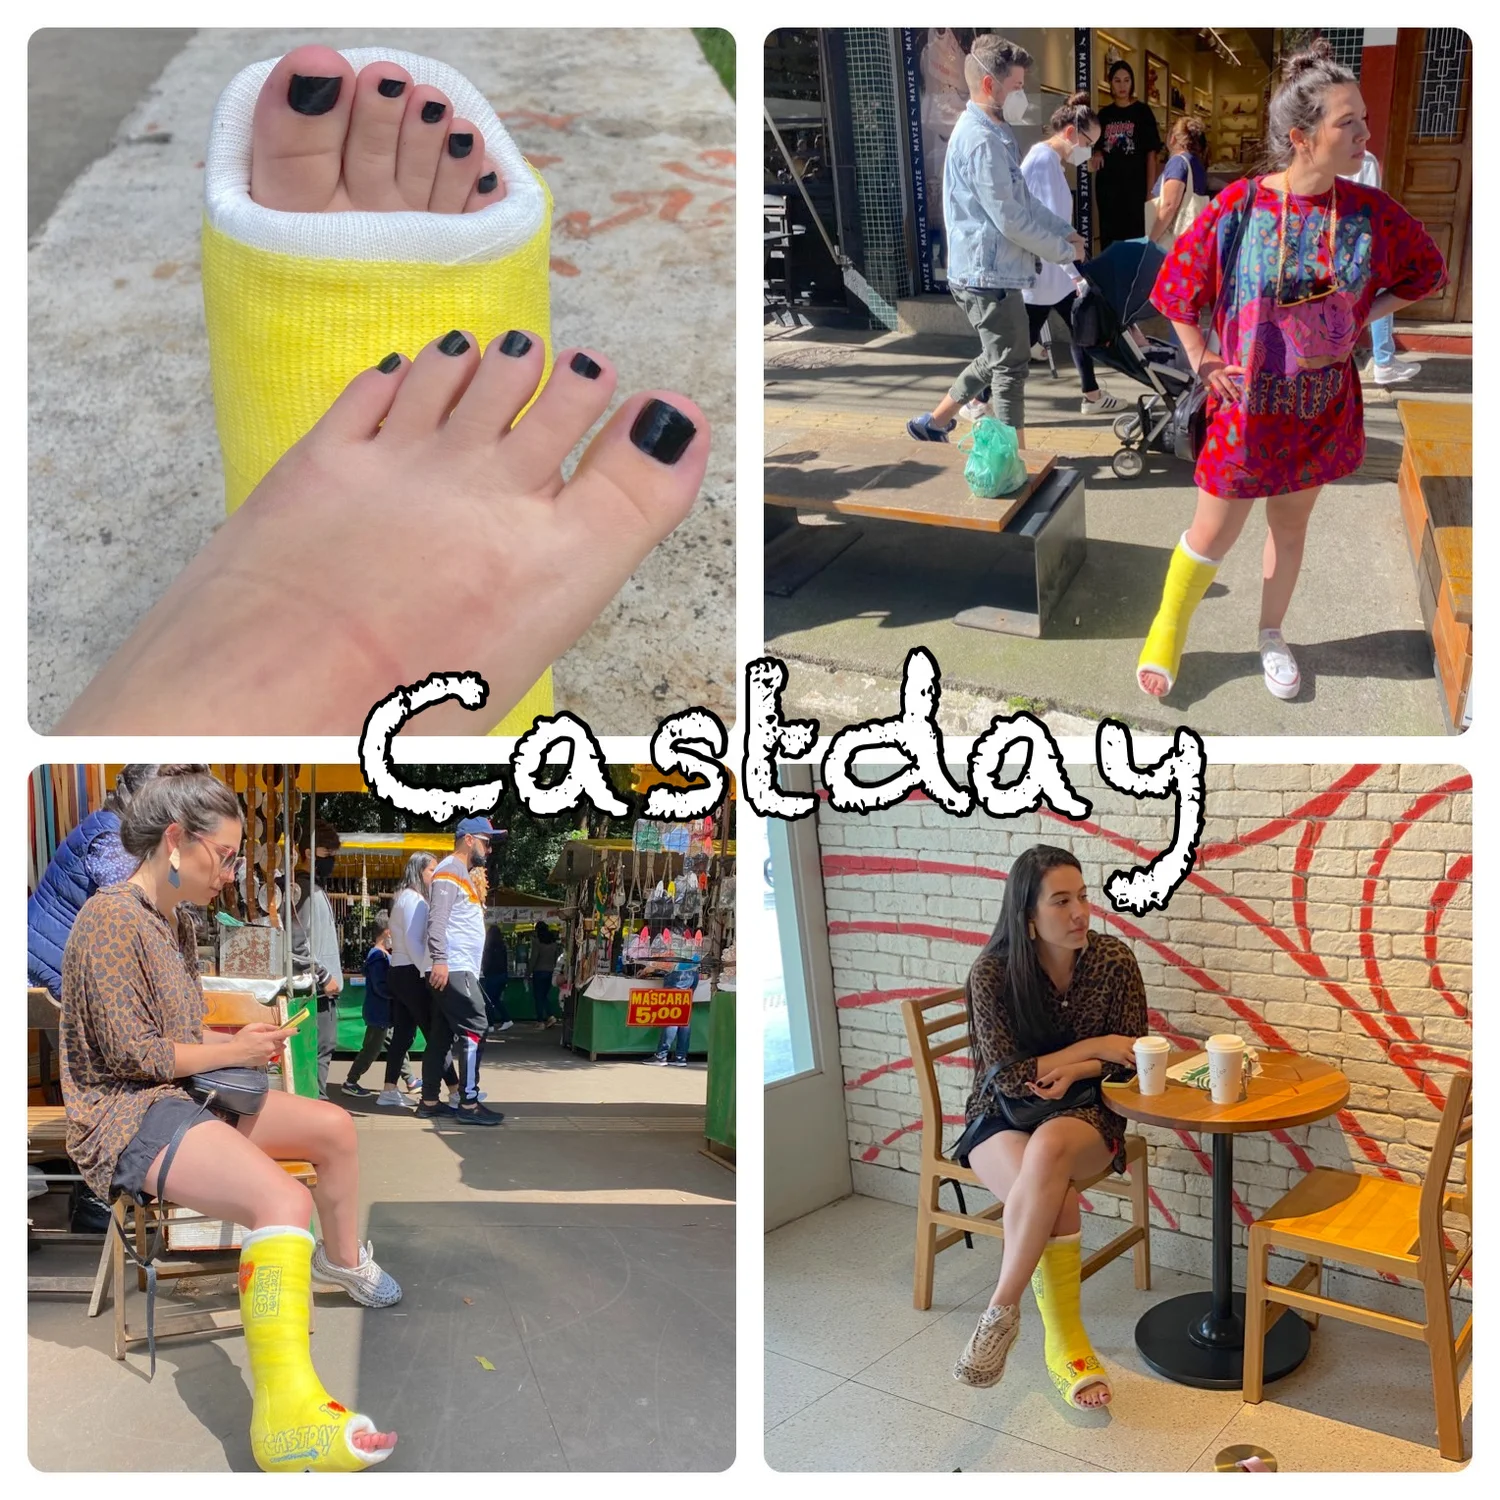  Kitty is Castday's new model and she started with a wonderful album! It's 4 incredible days in São Paulo, hosted in the iconic Copan building. She is beautiful and her feet are perfect. She paraded very nimbly with her SLWC in antique fairs...